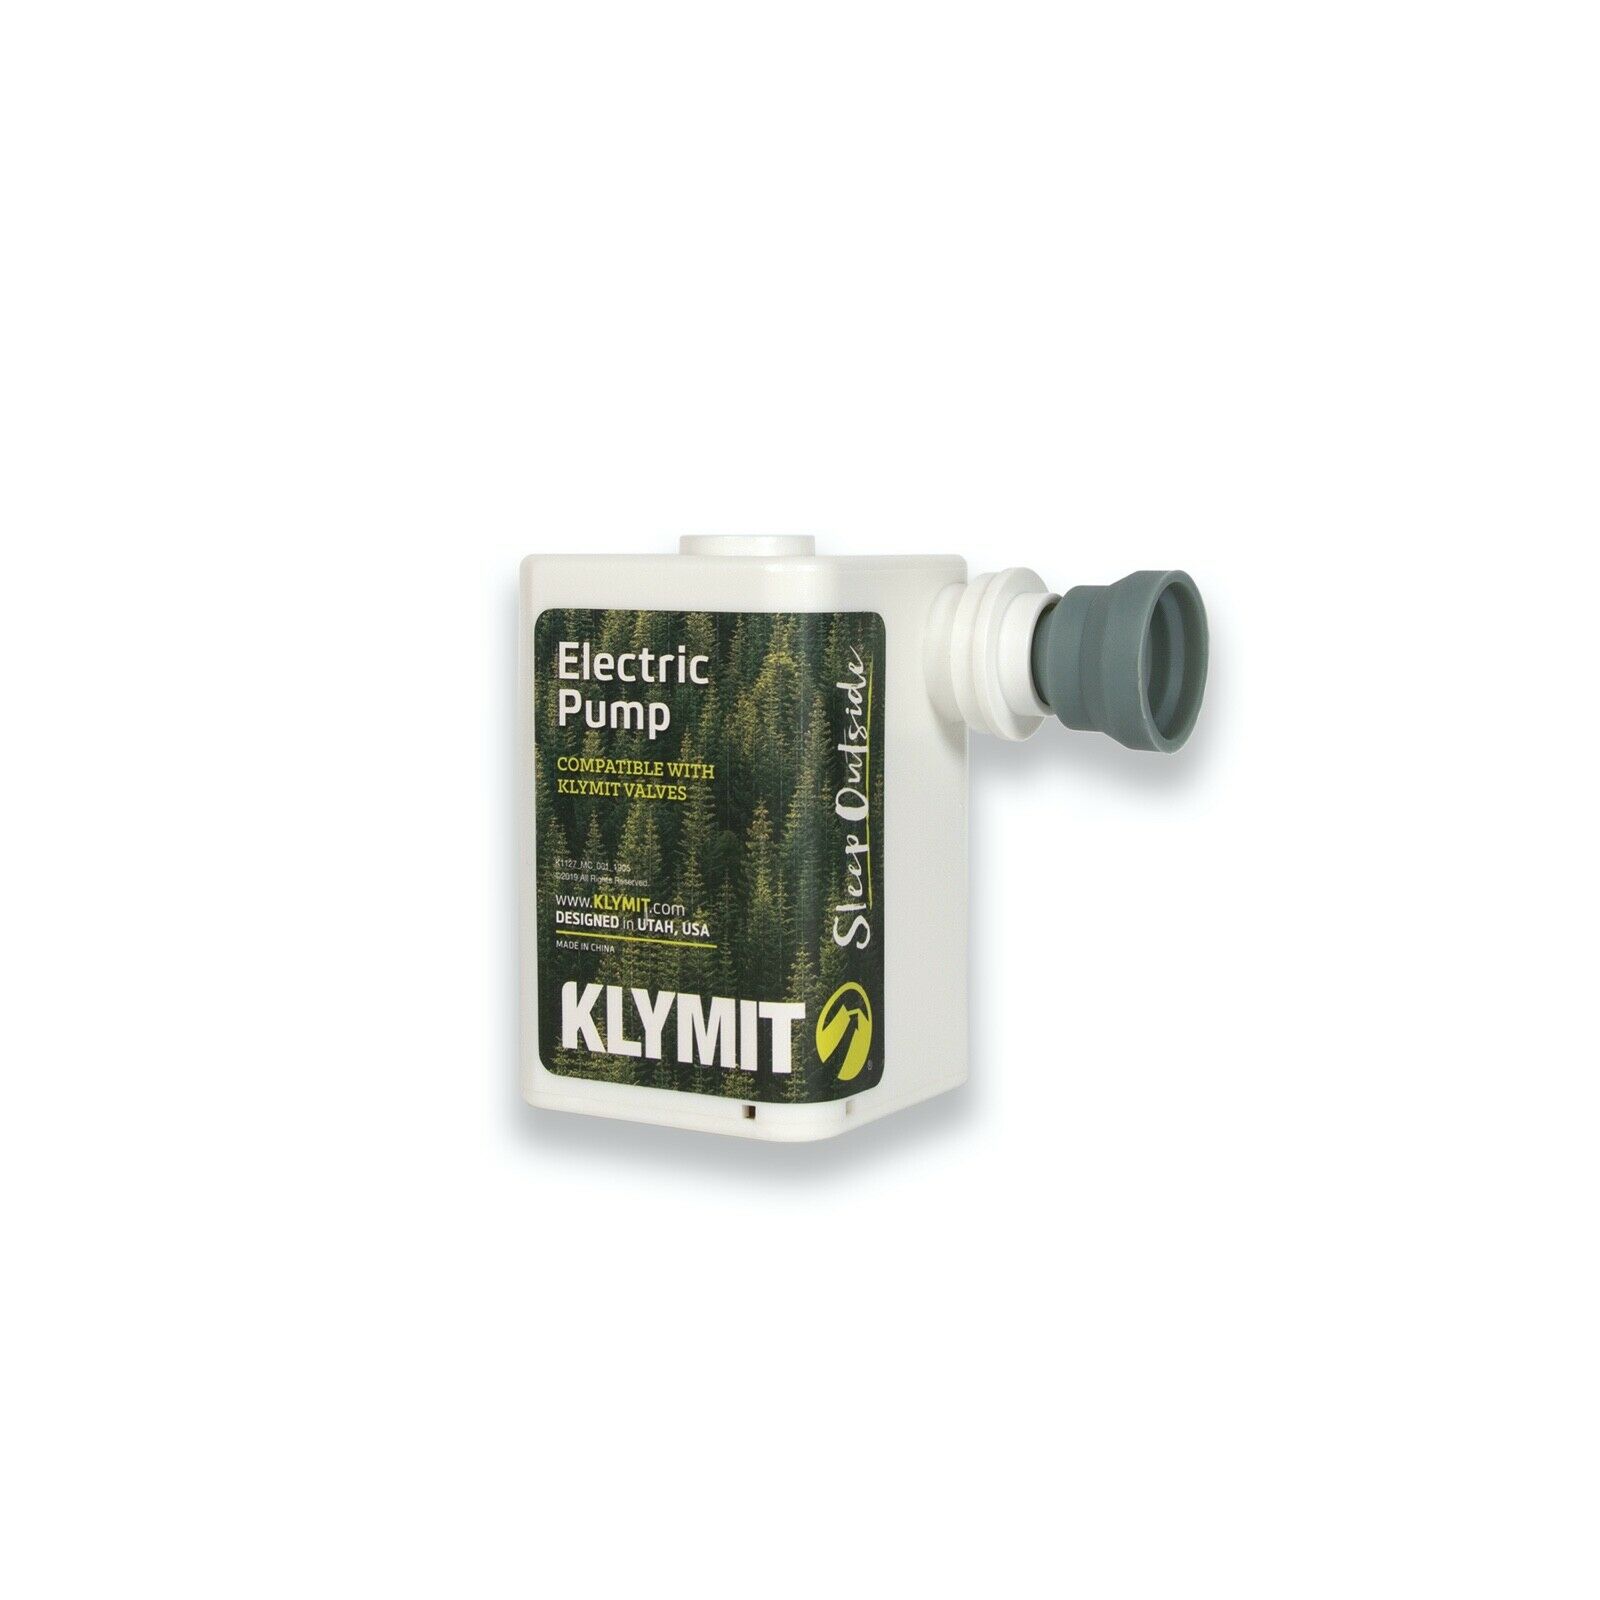 Klymit Electric Air Pump Usb Rechargeable For Camping Sleeping Pads - Brand New